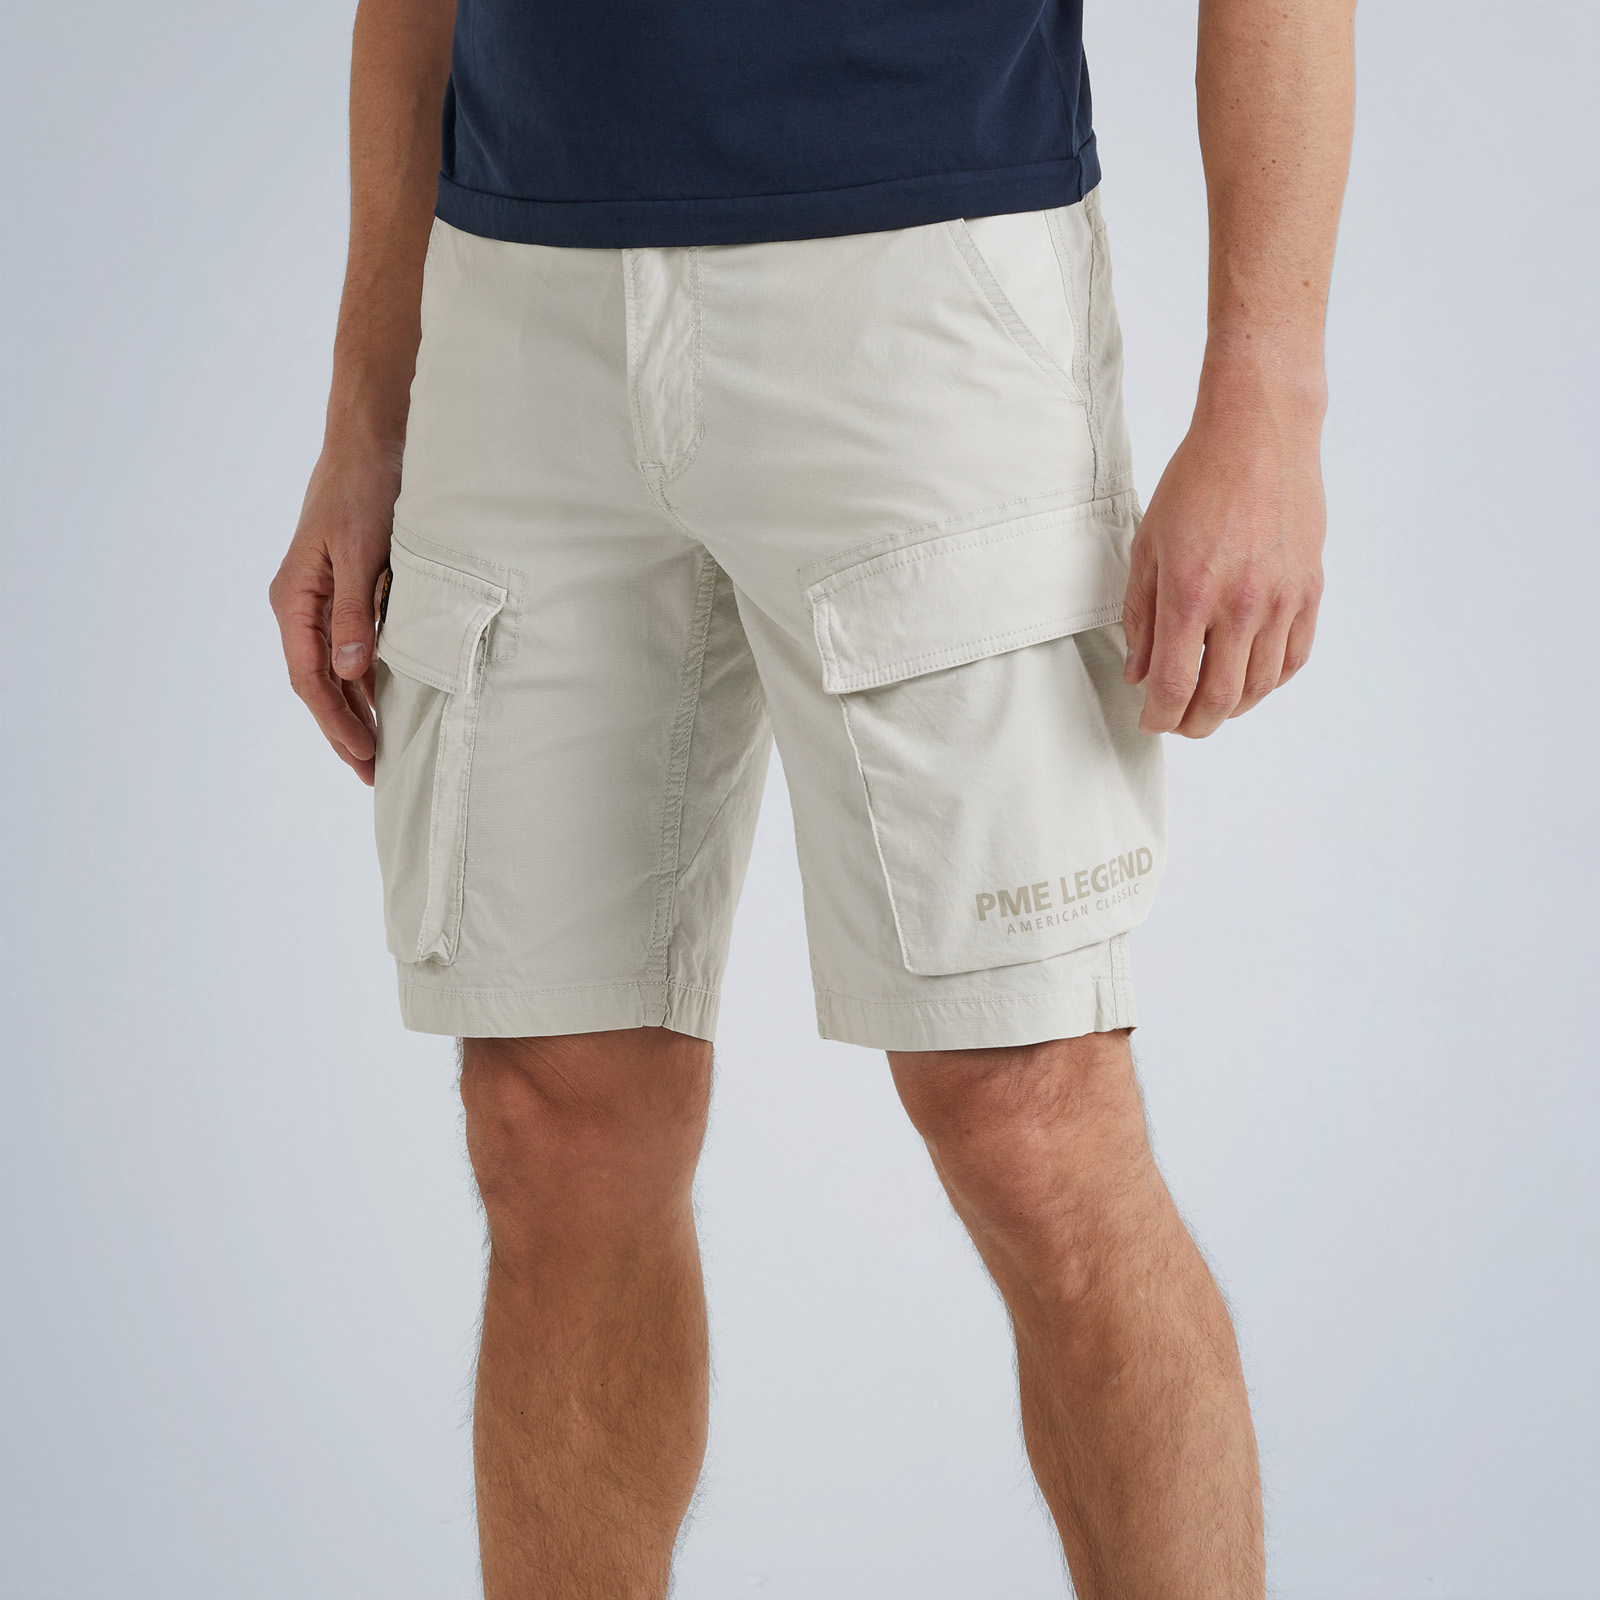 returns Free | and | LEGEND PME shipping Wingtip Cargo Short